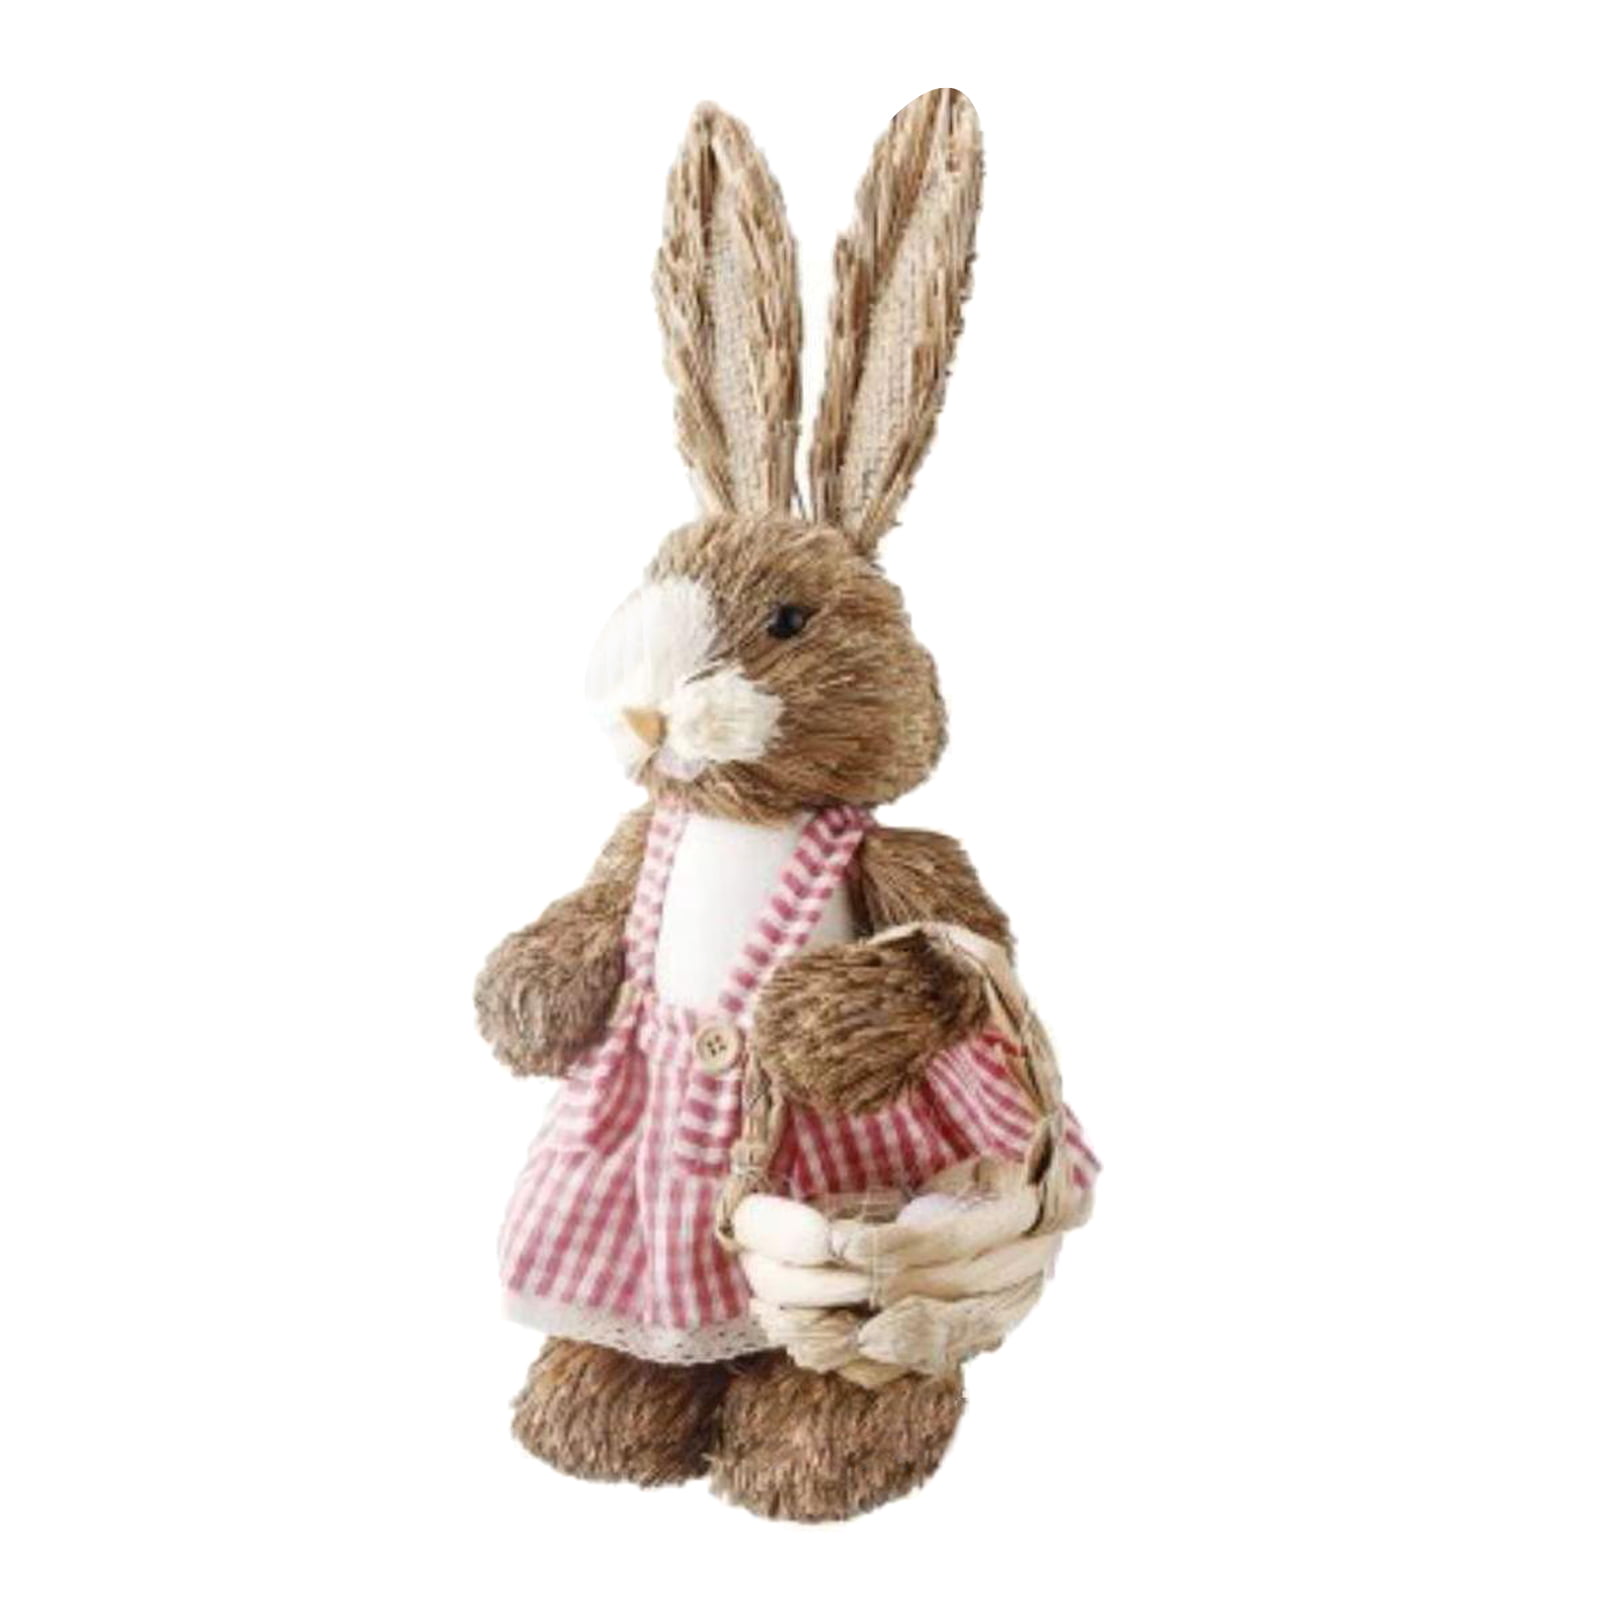 35cm STRAW RABBIT BOY WITH PICK HOME DECORATION EASTER BUNNY STATUE ORNAMENT 